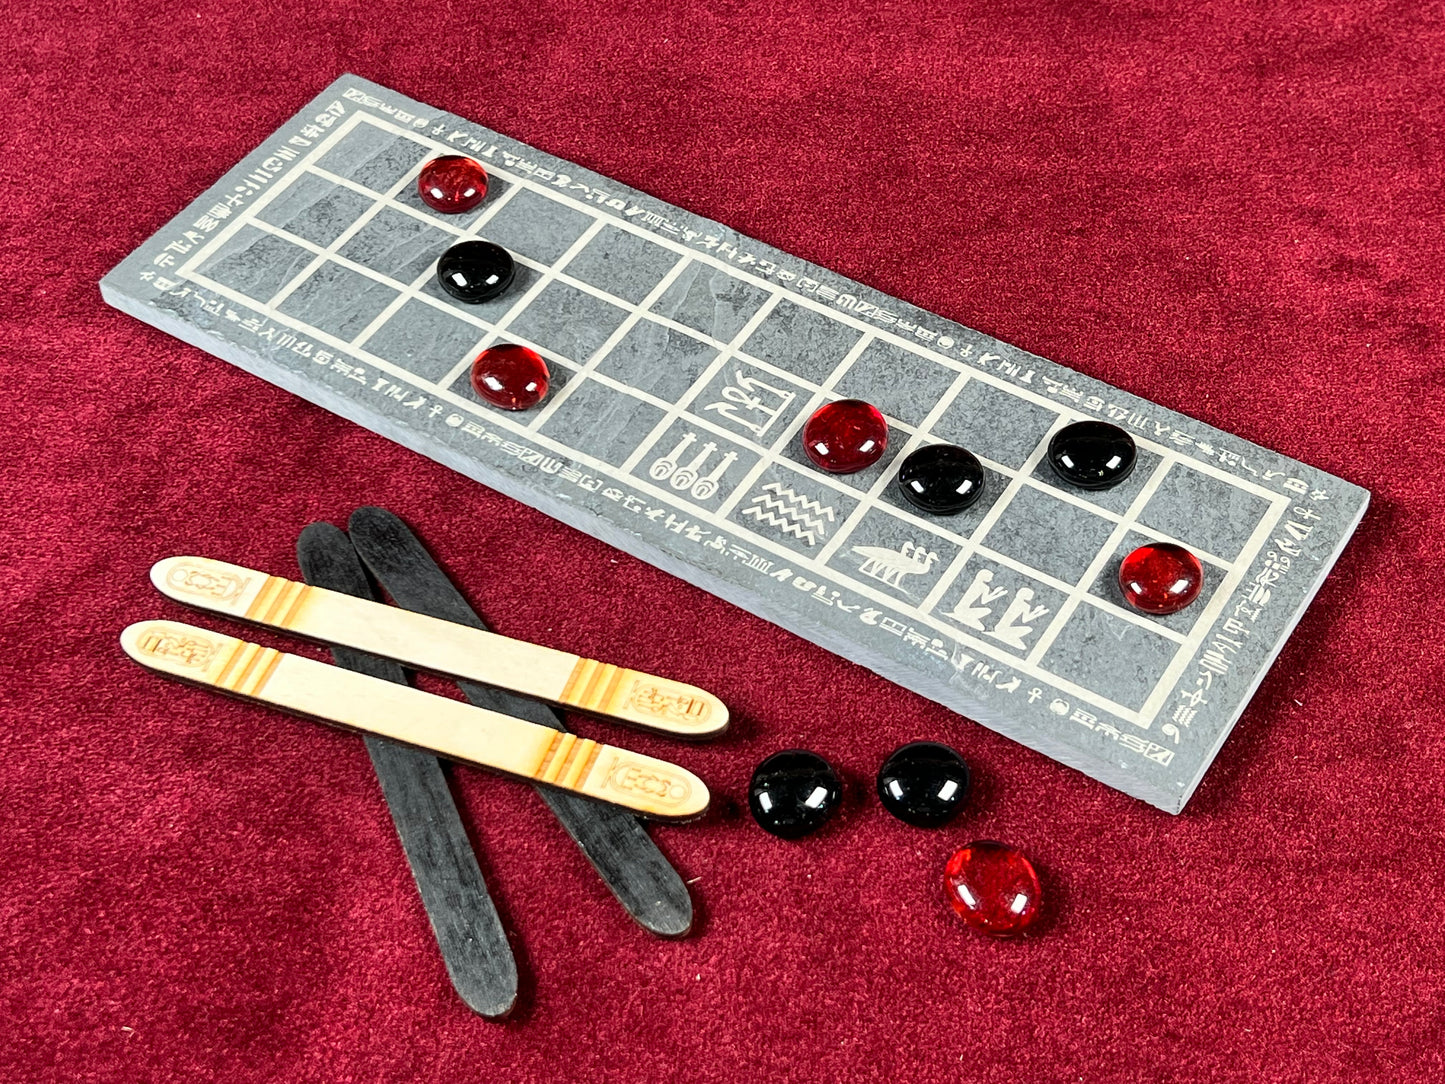 Engraved Stone Ancient Egyptian SENET Game ~ From the Tomb of the Pharaohs, Play the Mystical Game of the Ancients!